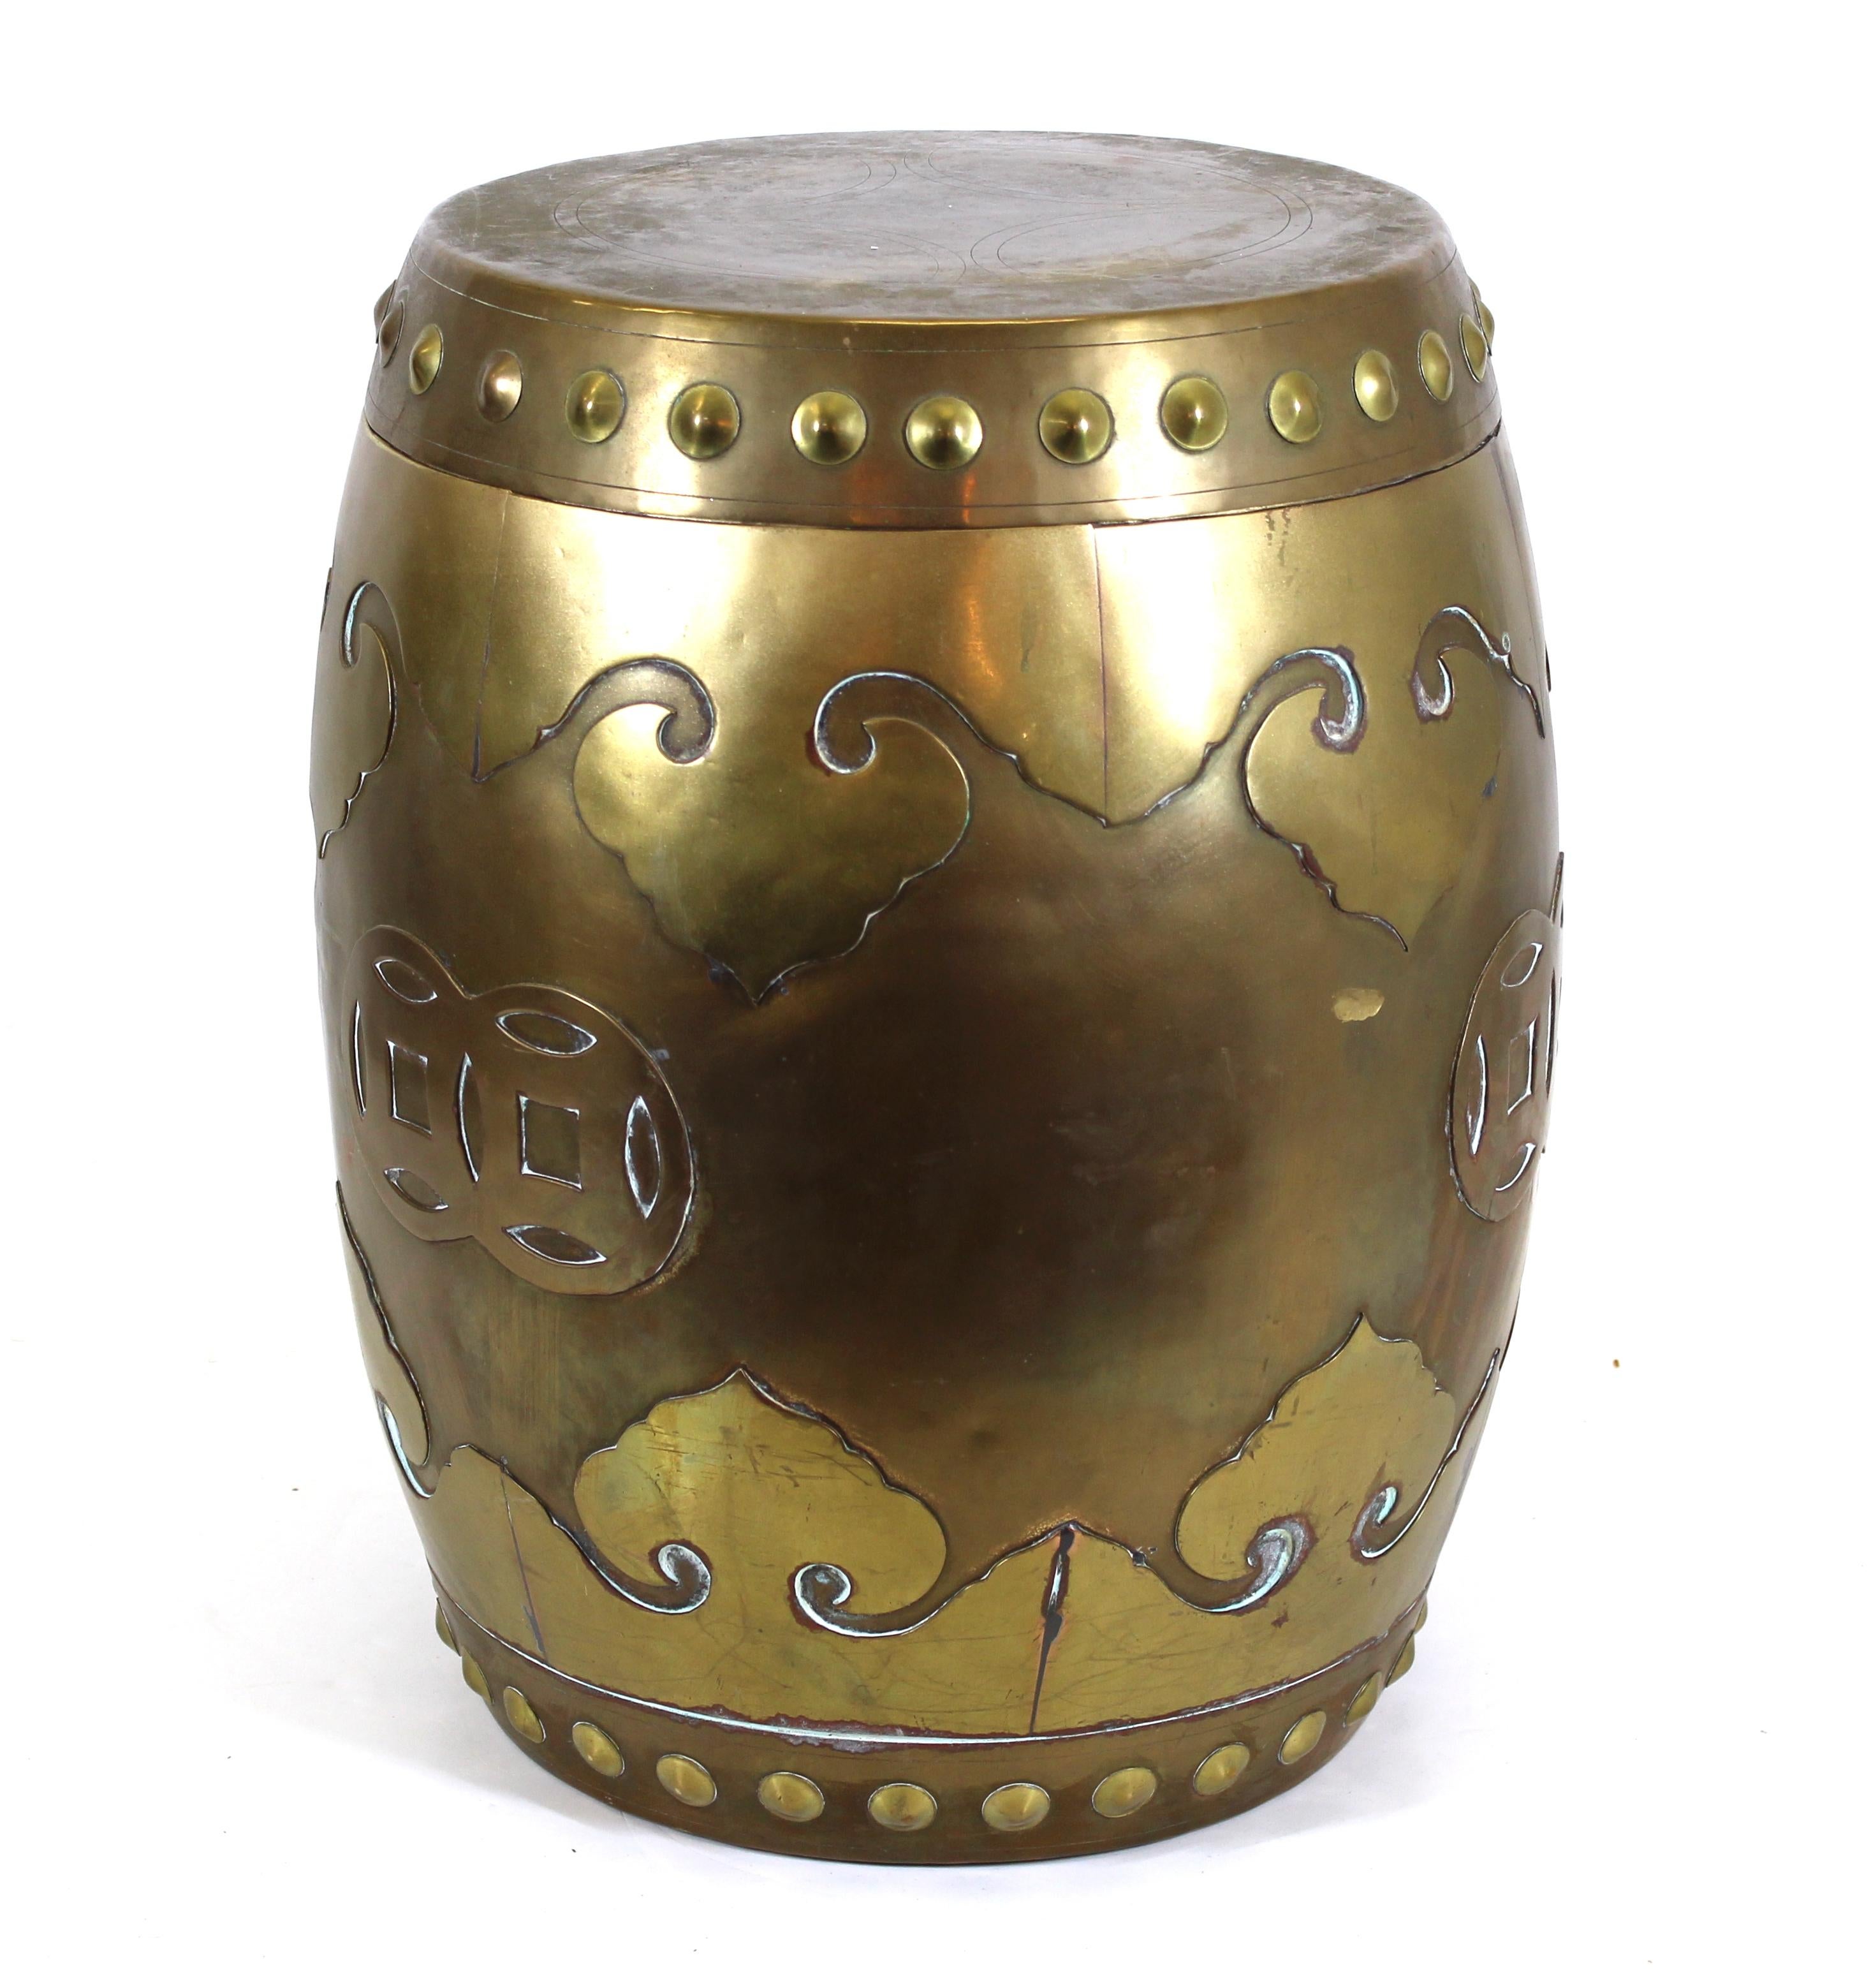 Asian Modern style barrel shaped garden stool in brass, with lid and interior storage space. Measures: 18